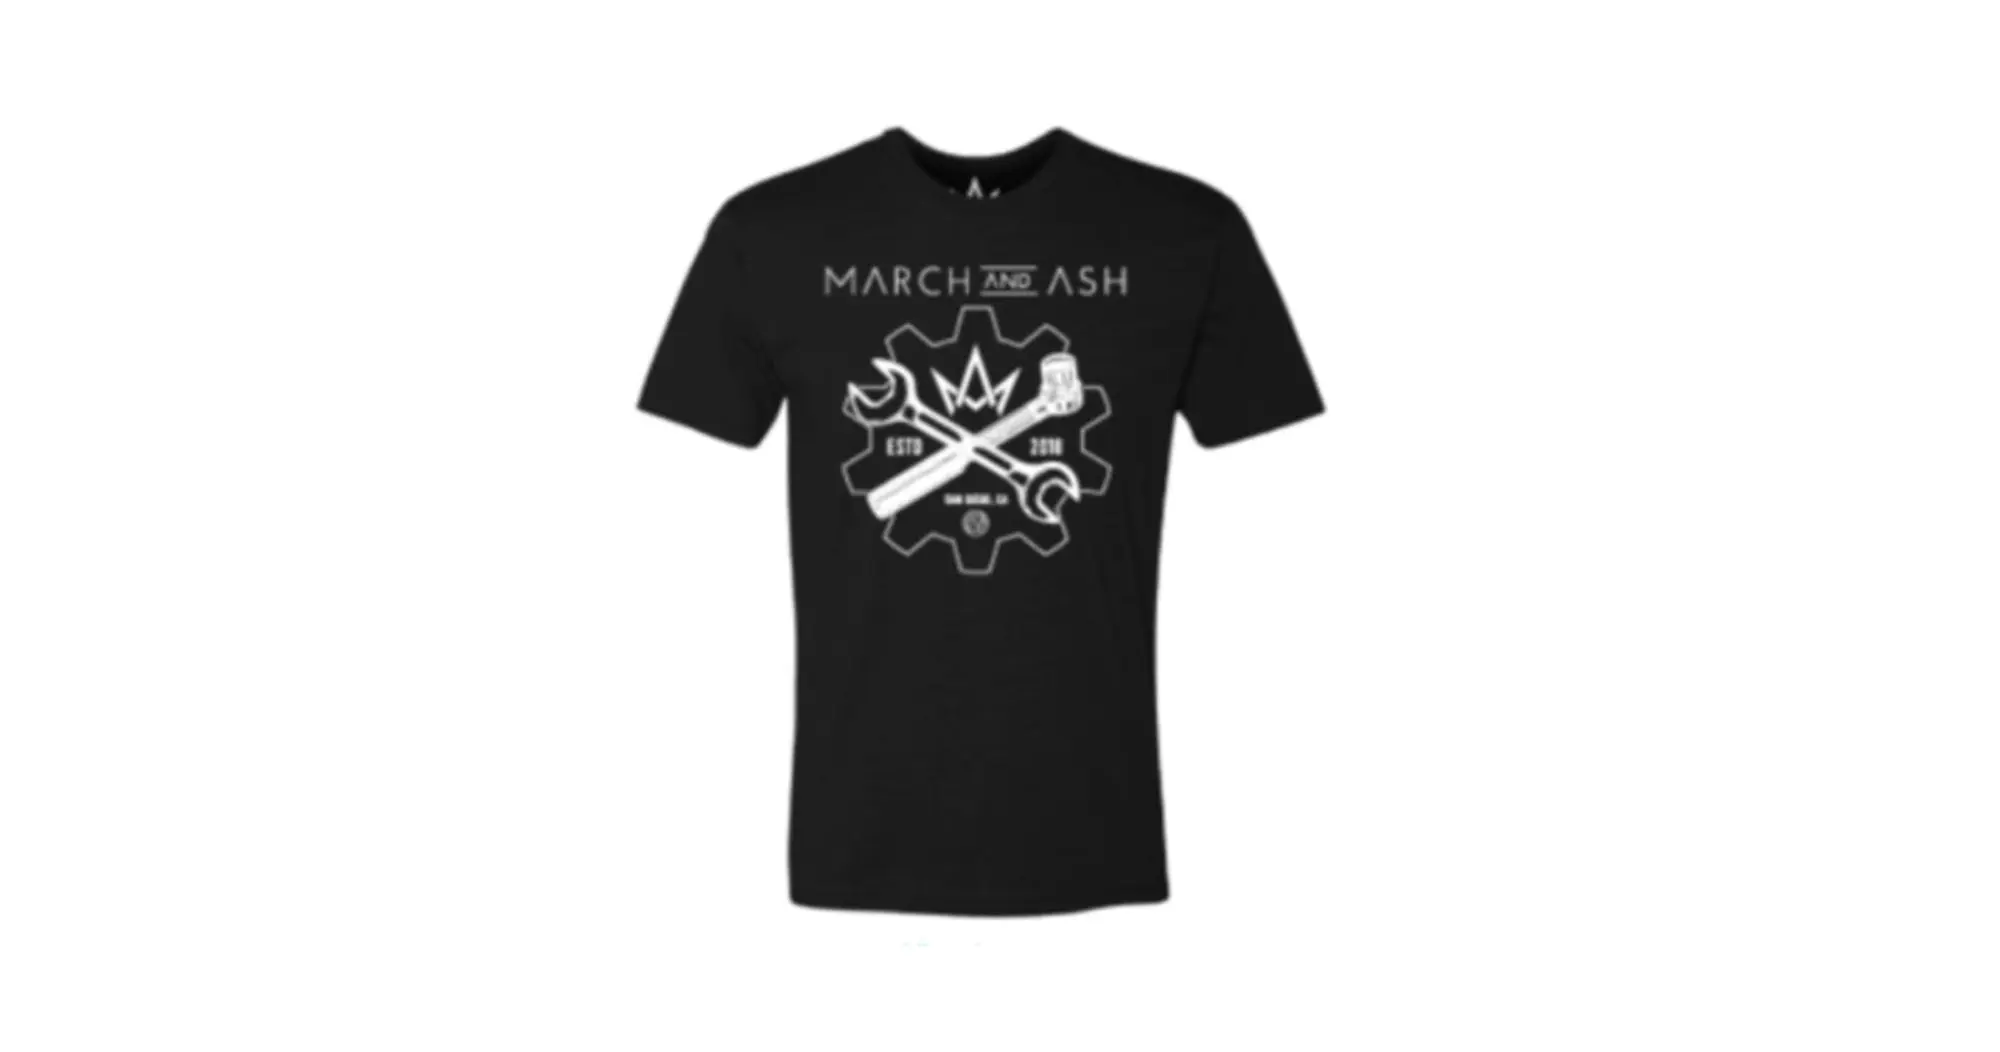 Unisex Black March and Ash Wrench Tee